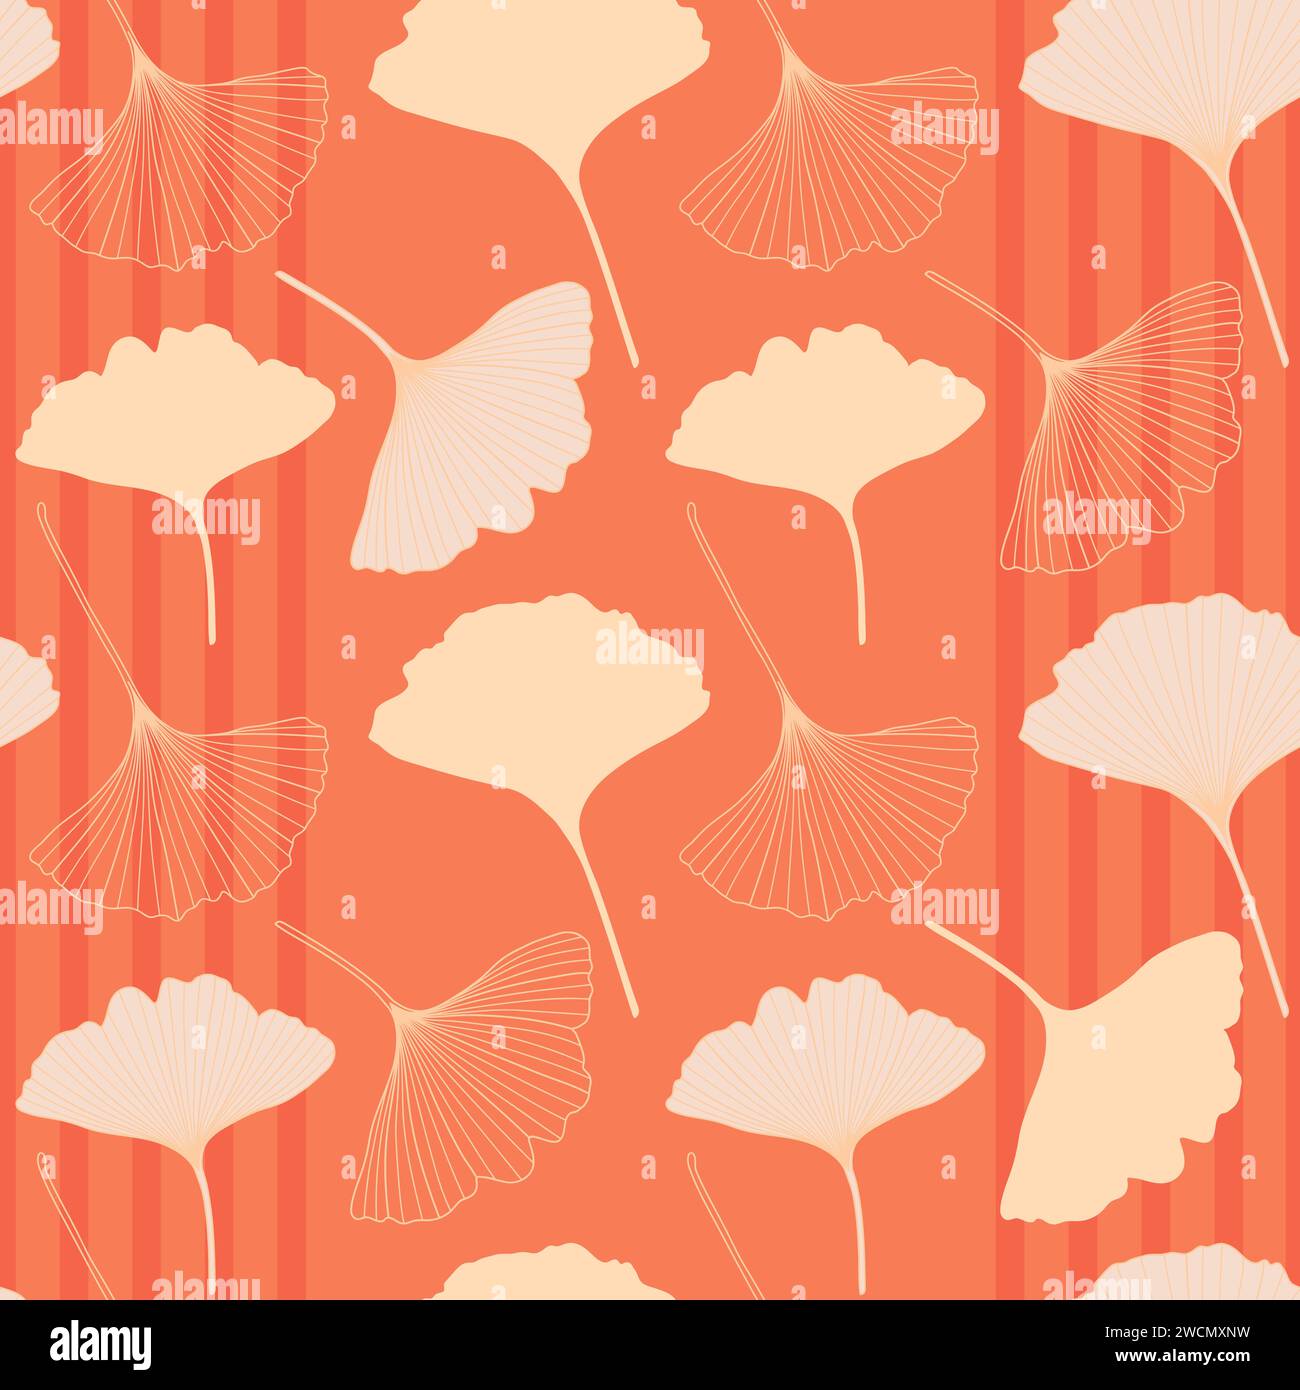 Ginkgo plant seamless pattern in trendy 2024 peach fuzz color palette. Ginkgo biloba tree leaf outlines, silhouettes, vector illustration. Floral repe Stock Vector